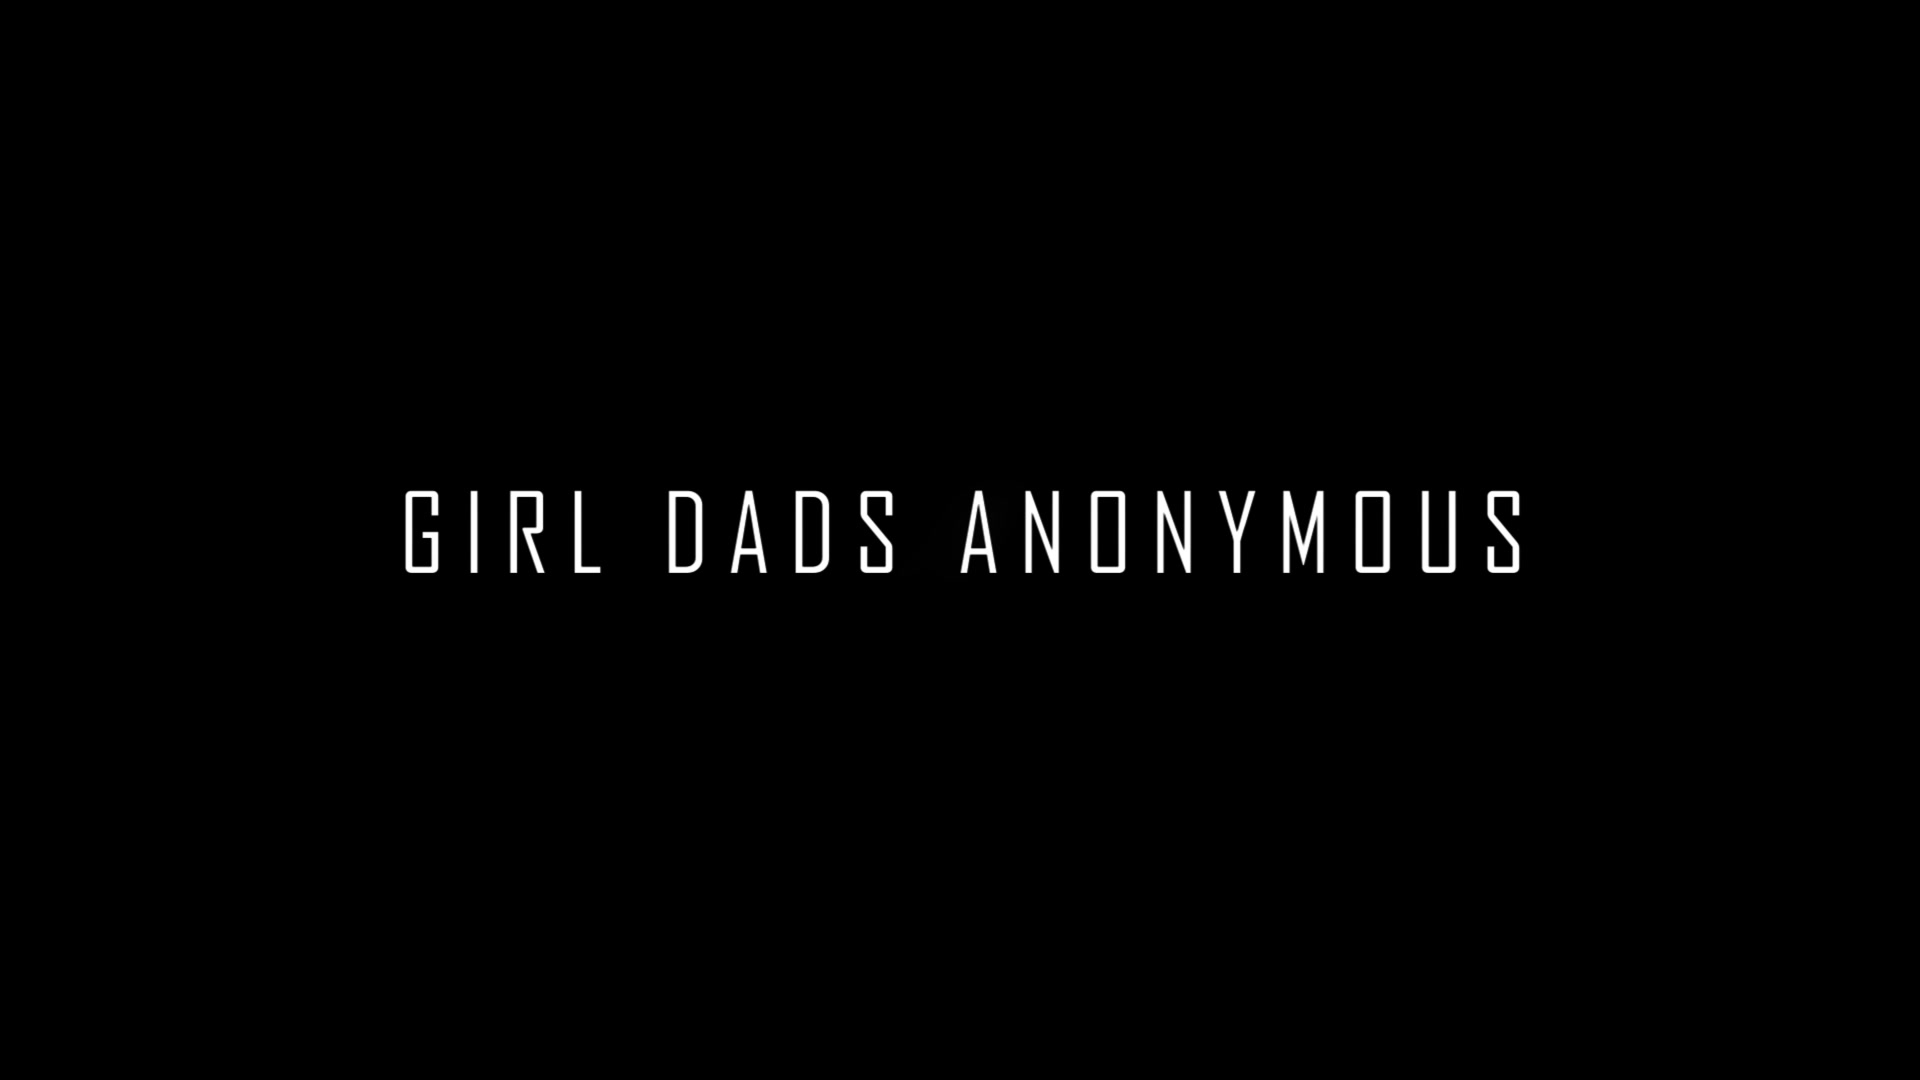 Girl Dads Anonymous Episode 1 - Shopping